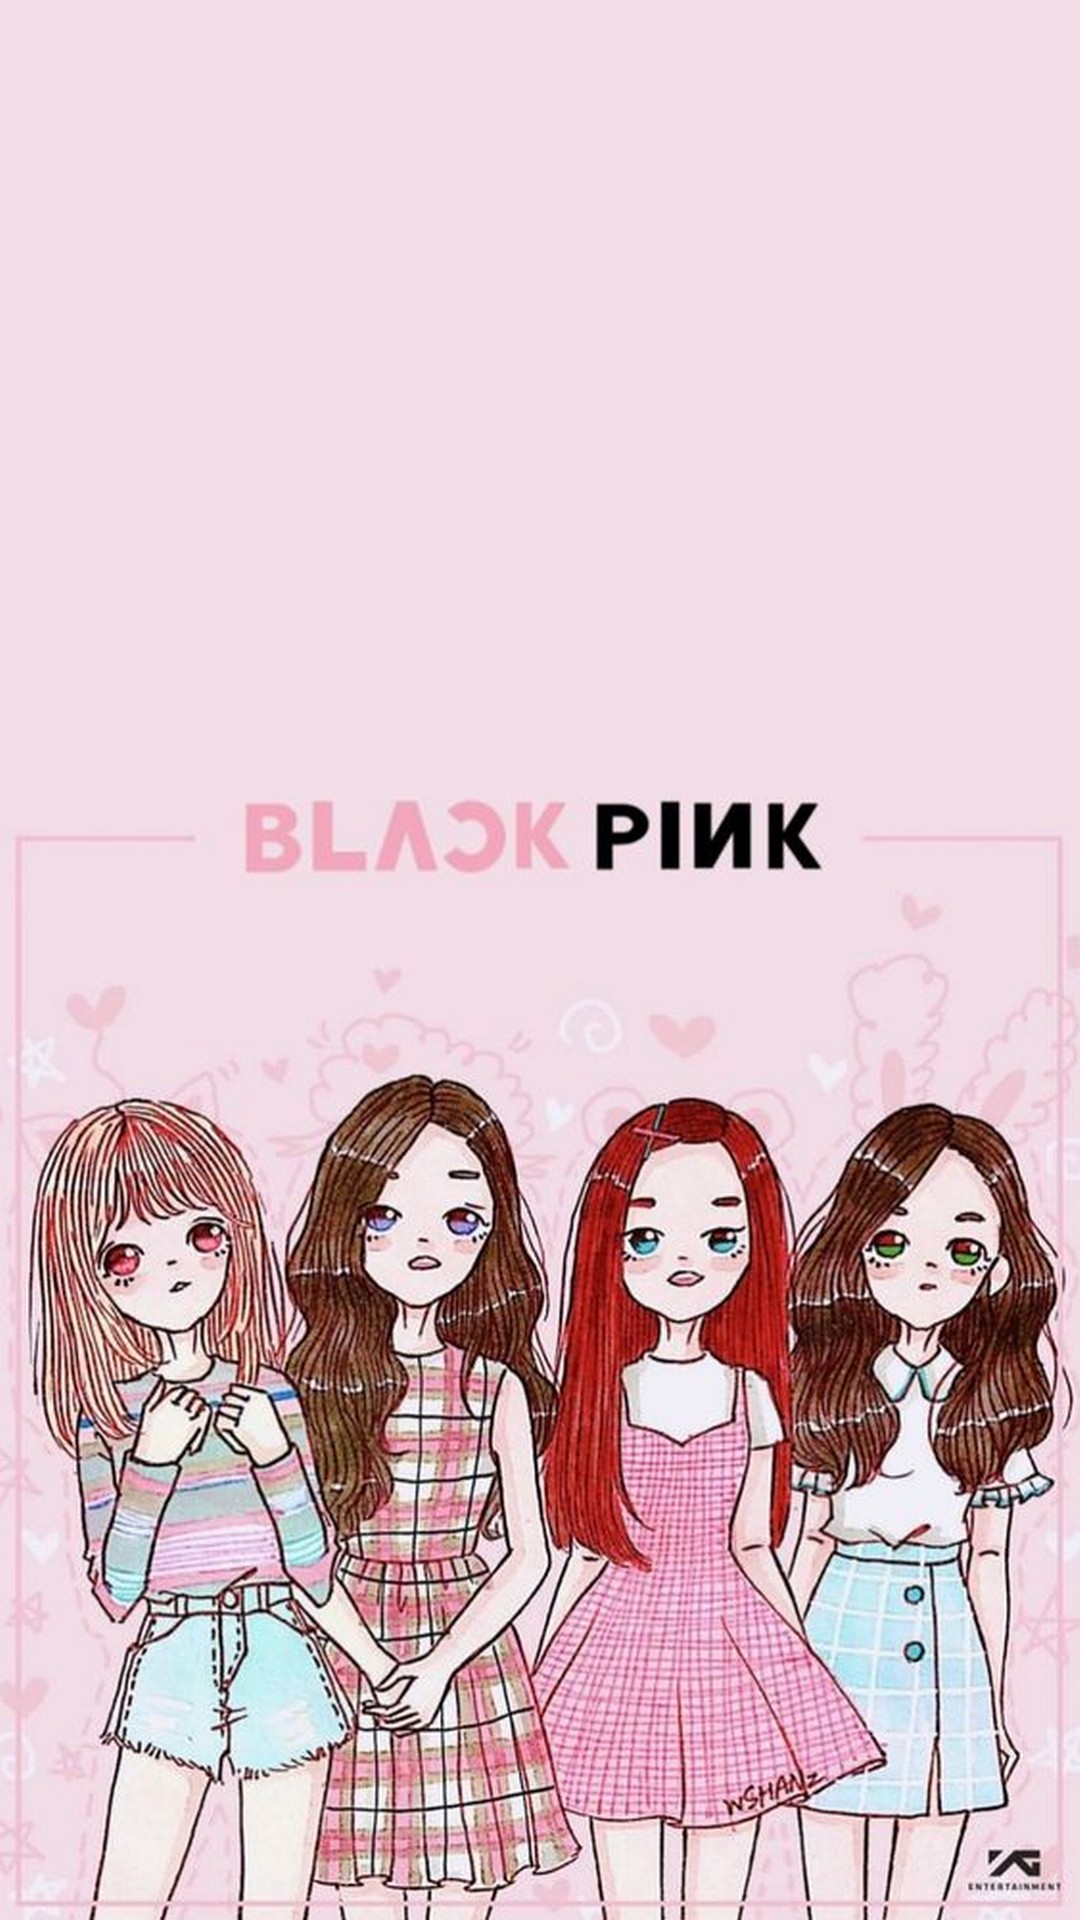 K-POP Blackpink Android Wallpaper with high-resolution 1080x1920 pixel. You can use this wallpaper for your Android backgrounds, Tablet, Samsung Screensavers, Mobile Phone Lock Screen and another Smartphones device